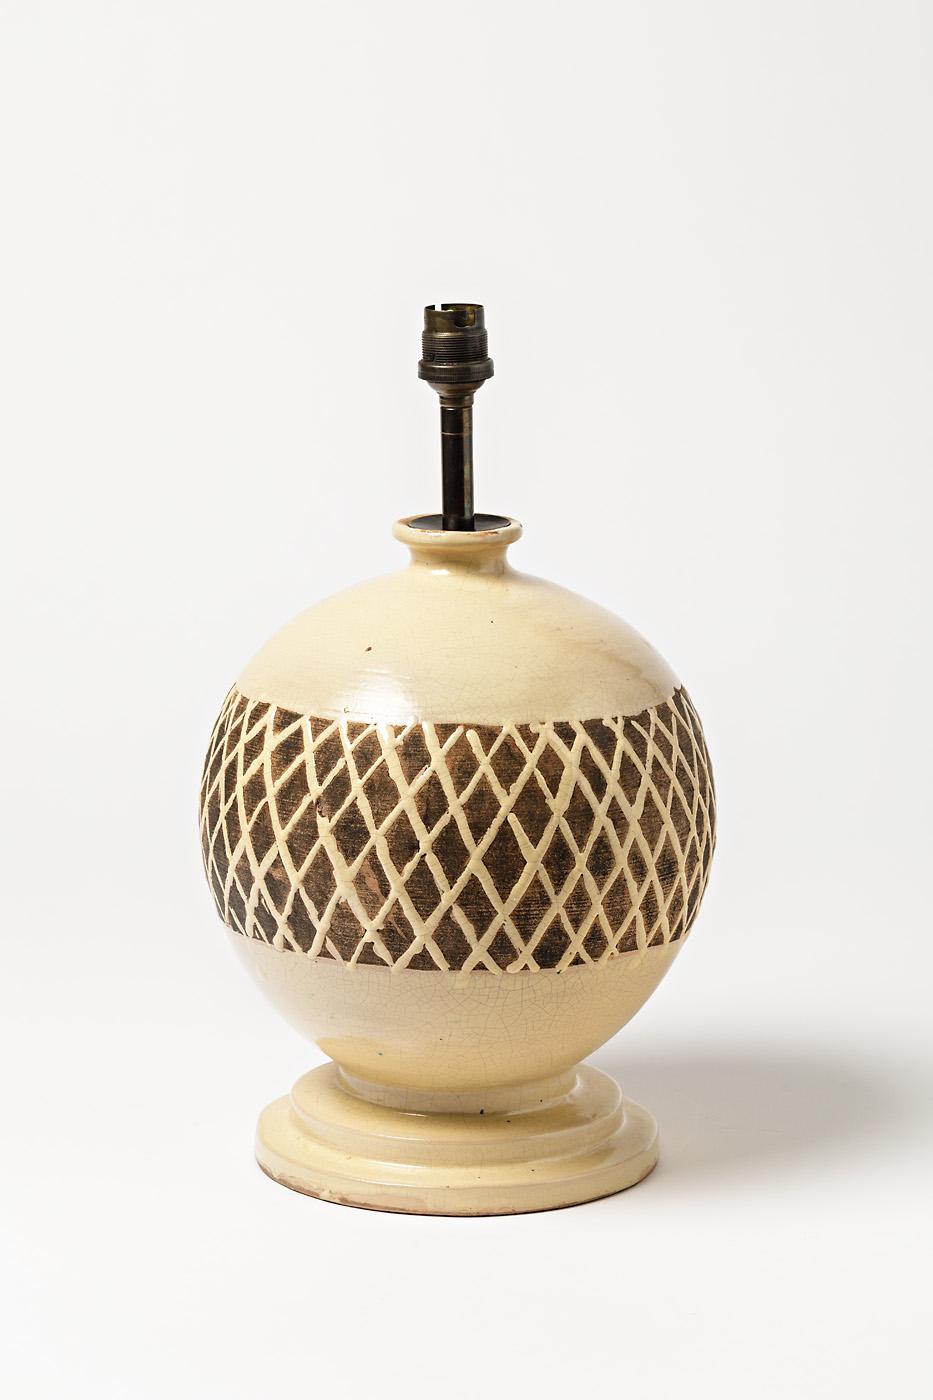 An elegant ceramic lamp with glaze decoration.
Perfect original conditions.
Signed under the base 